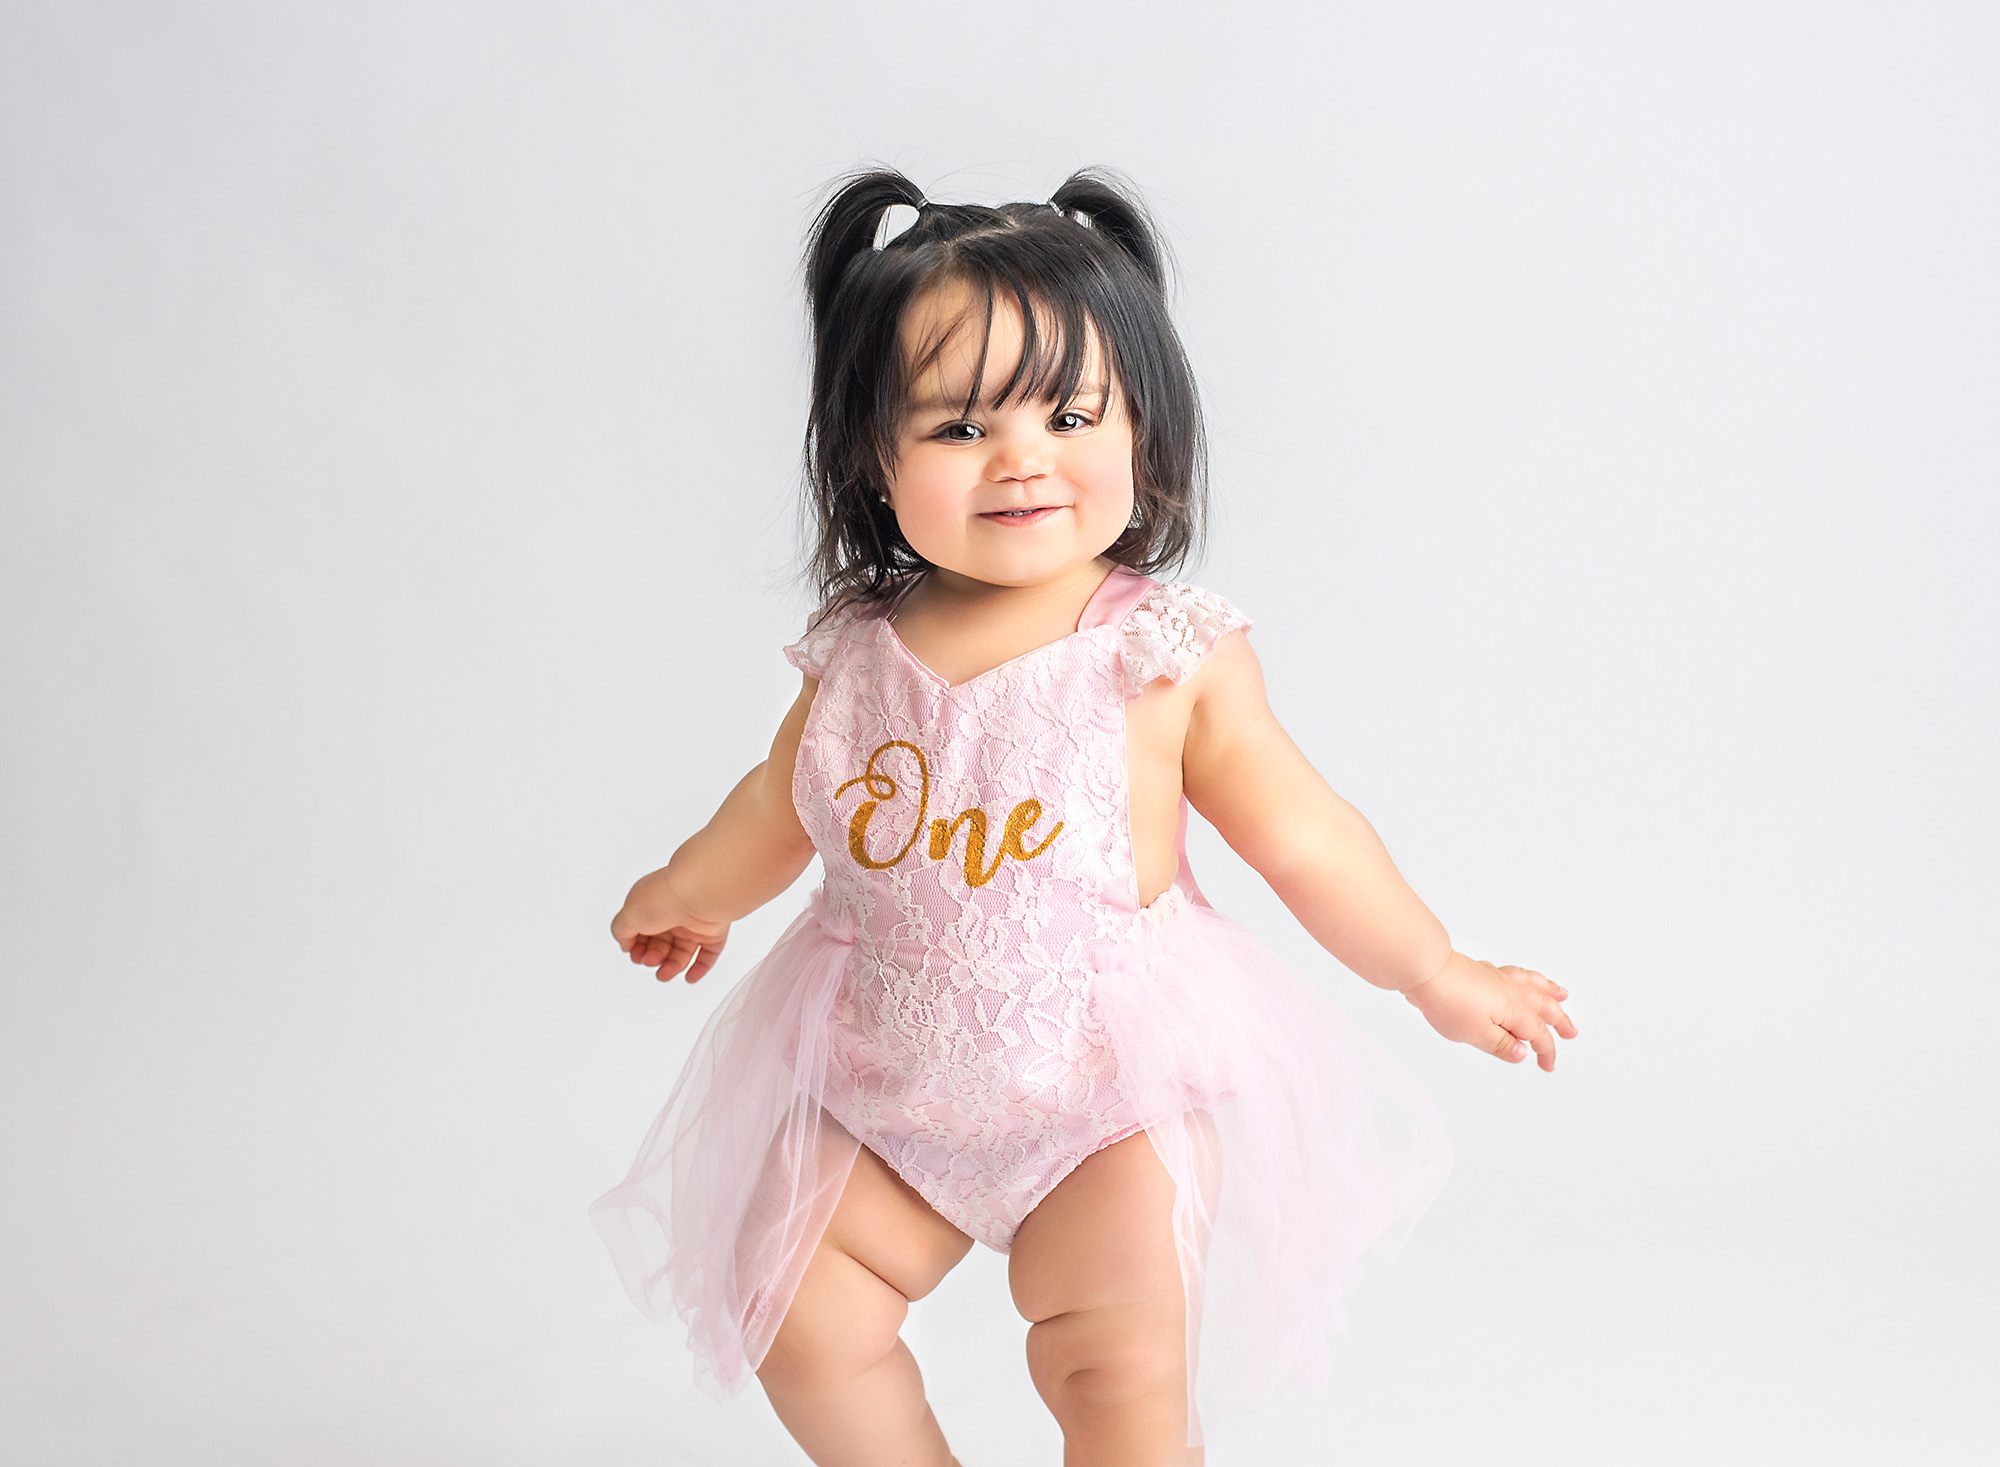 one year old baby girl in pigtails and pink laced one dress standing on neutral background